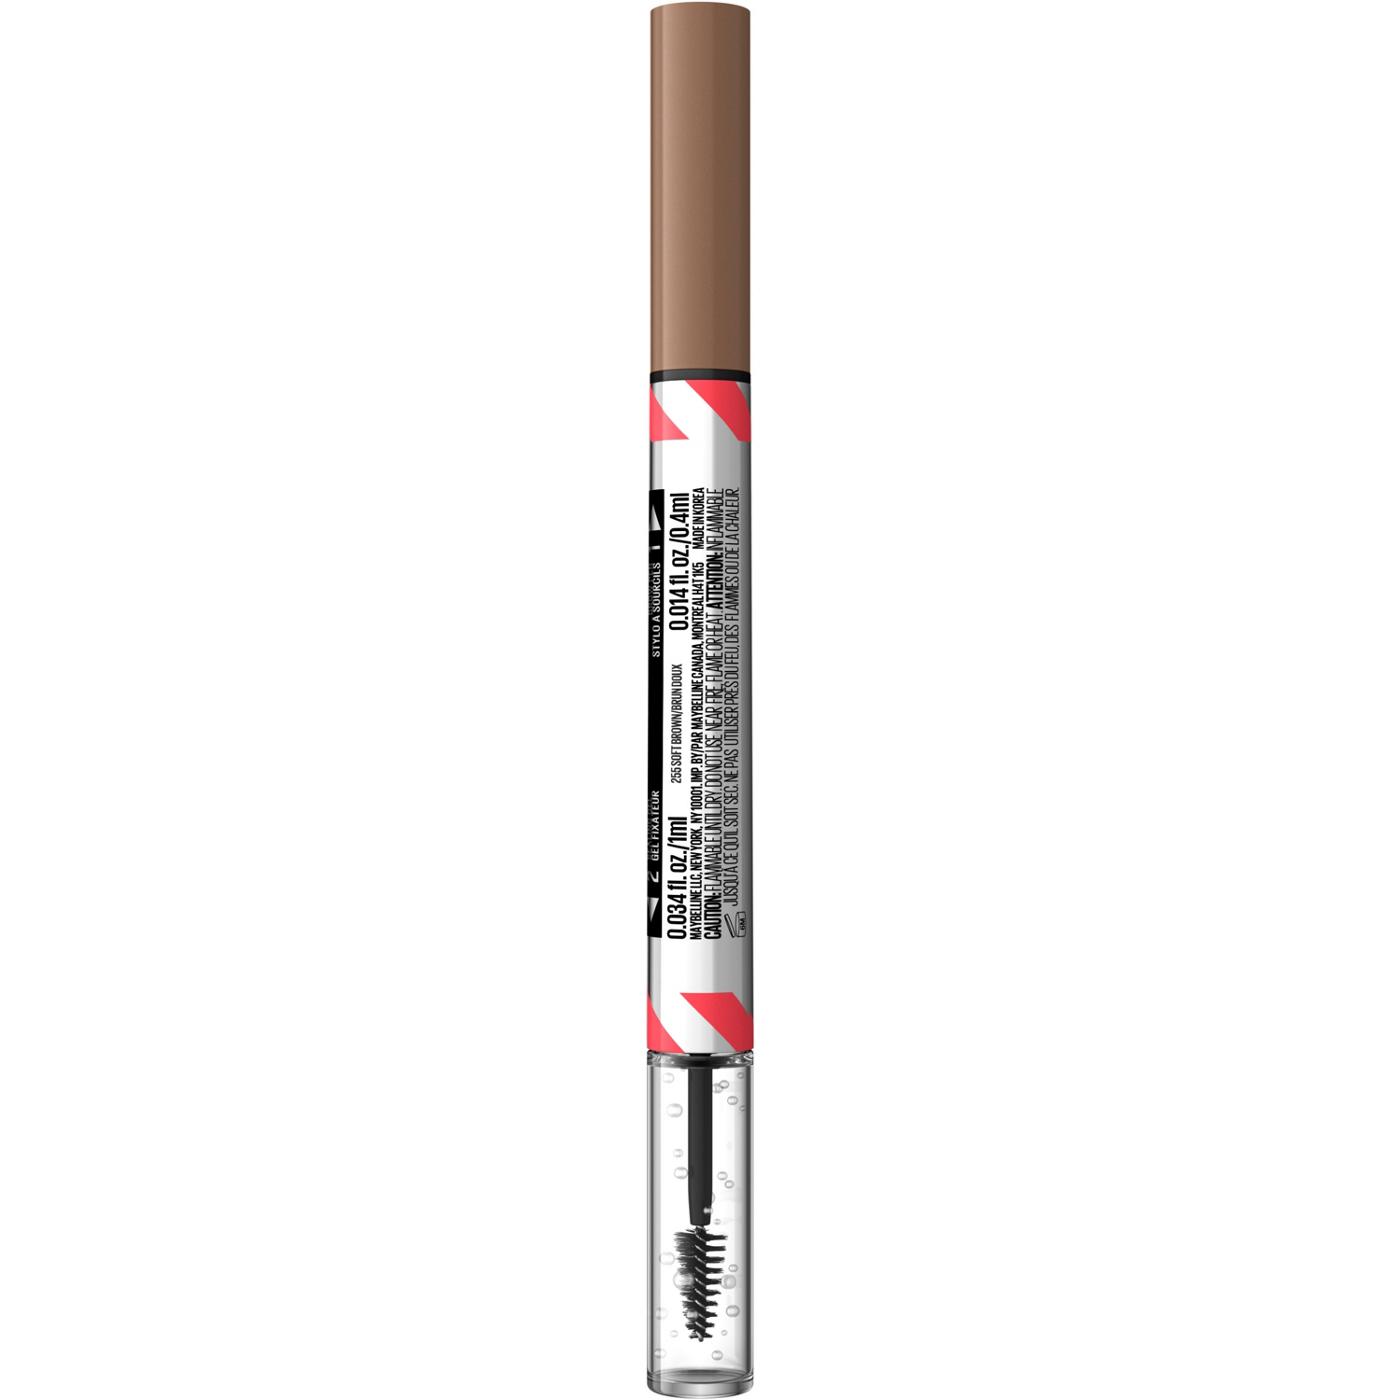 Maybelline Build A Brow 2 In 1 Brow Pen - Soft Brown; image 10 of 16